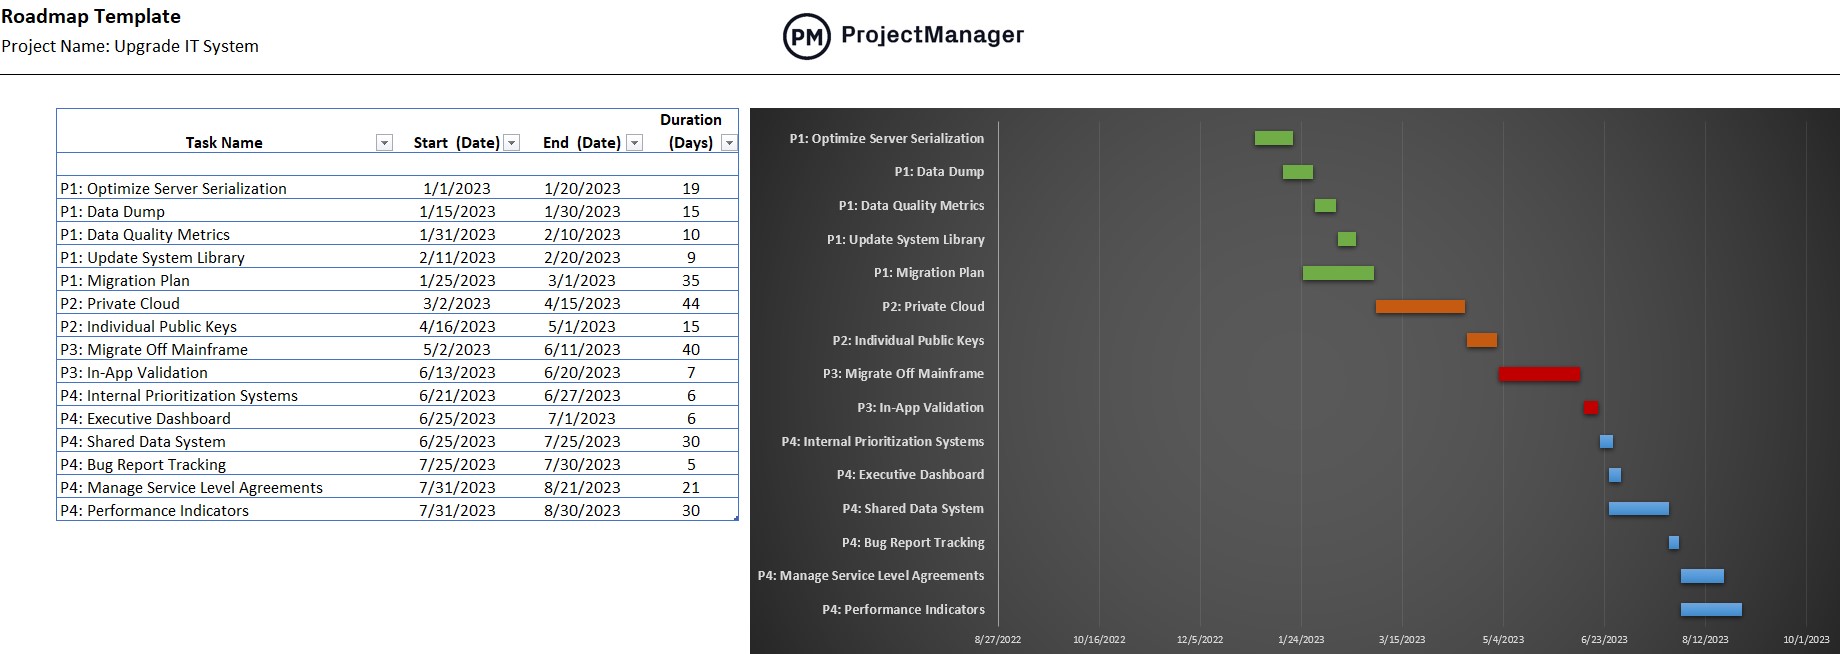 ProjectManager's free roadmap template